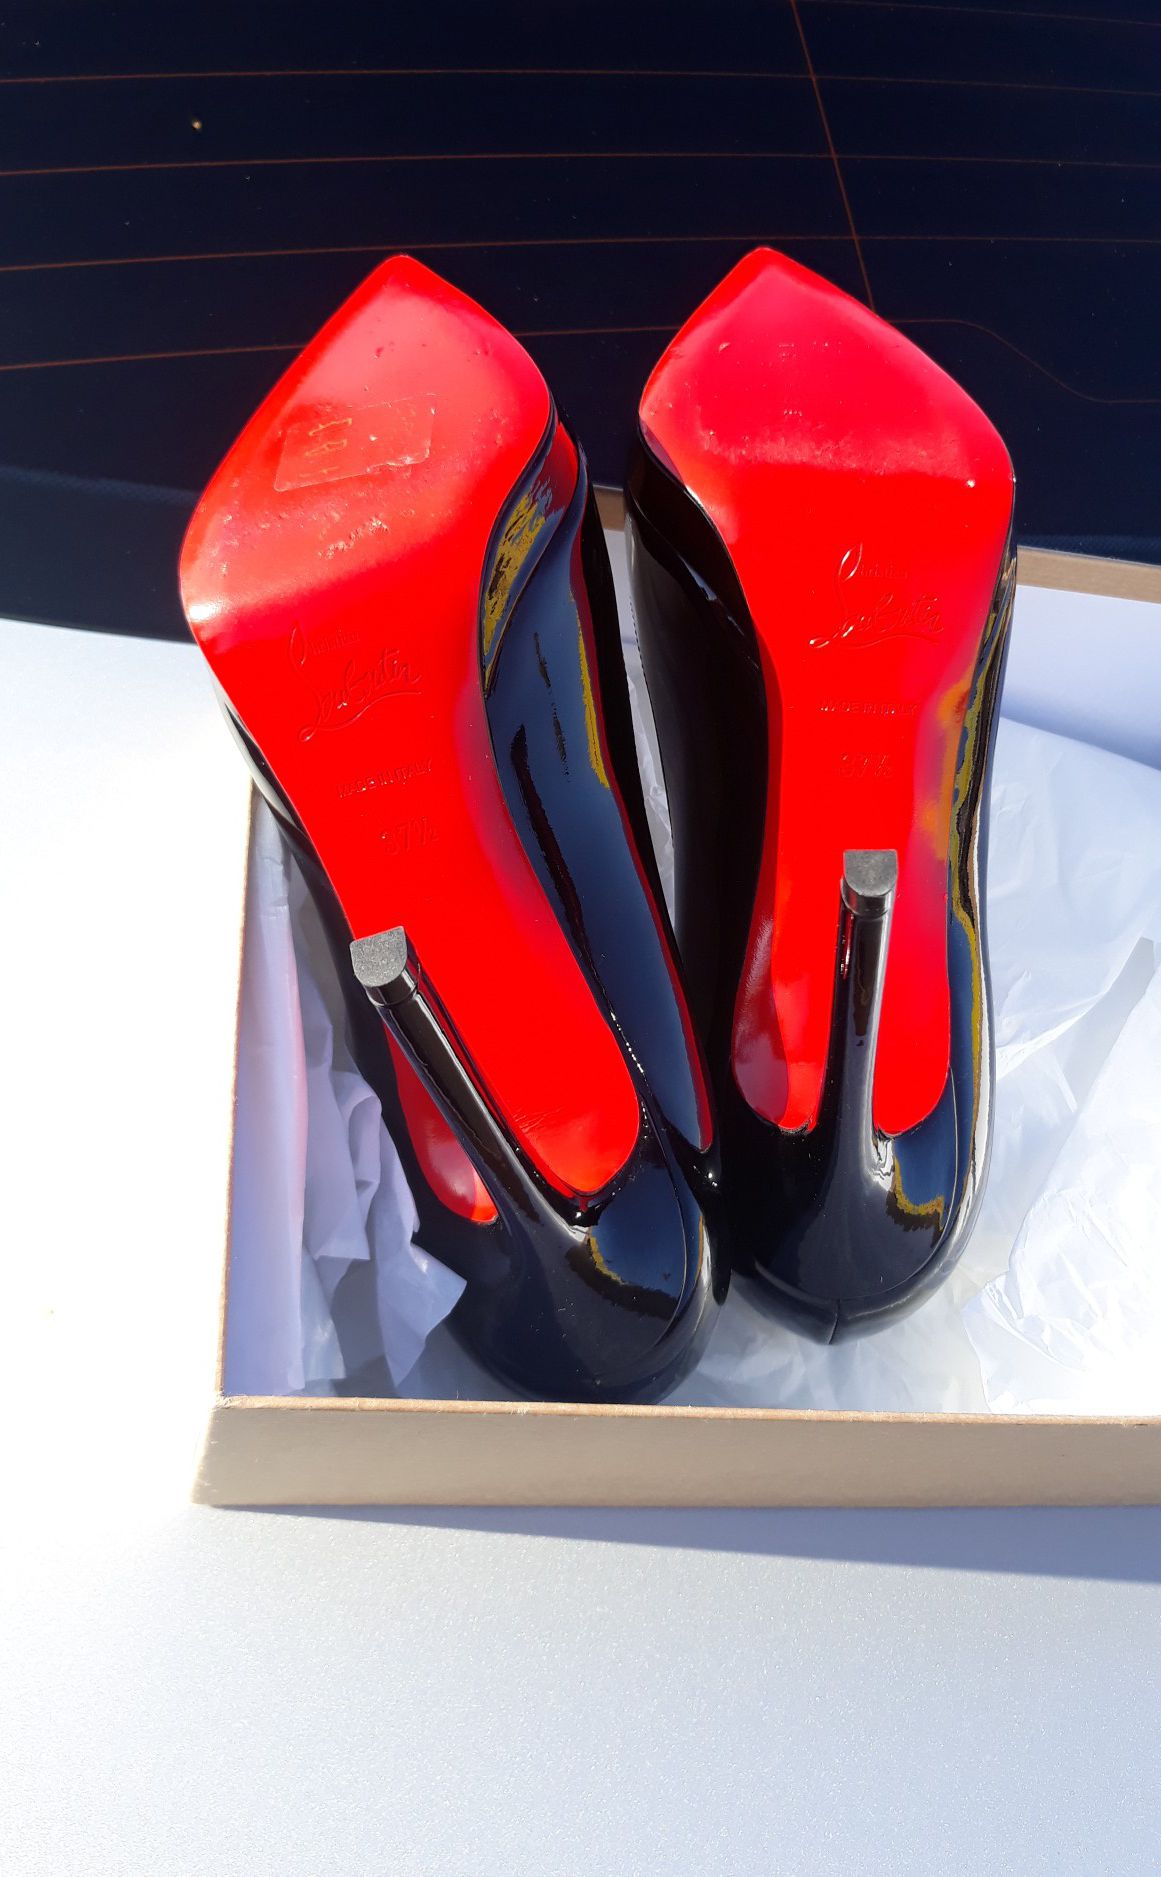 Heels Louis Vuitton Red Bottom Shoes - 3 For Sale on 1stDibs  louis  vuitton shoes with red soles, red bottom louis vuitton, louis vuitton heels  red bottom